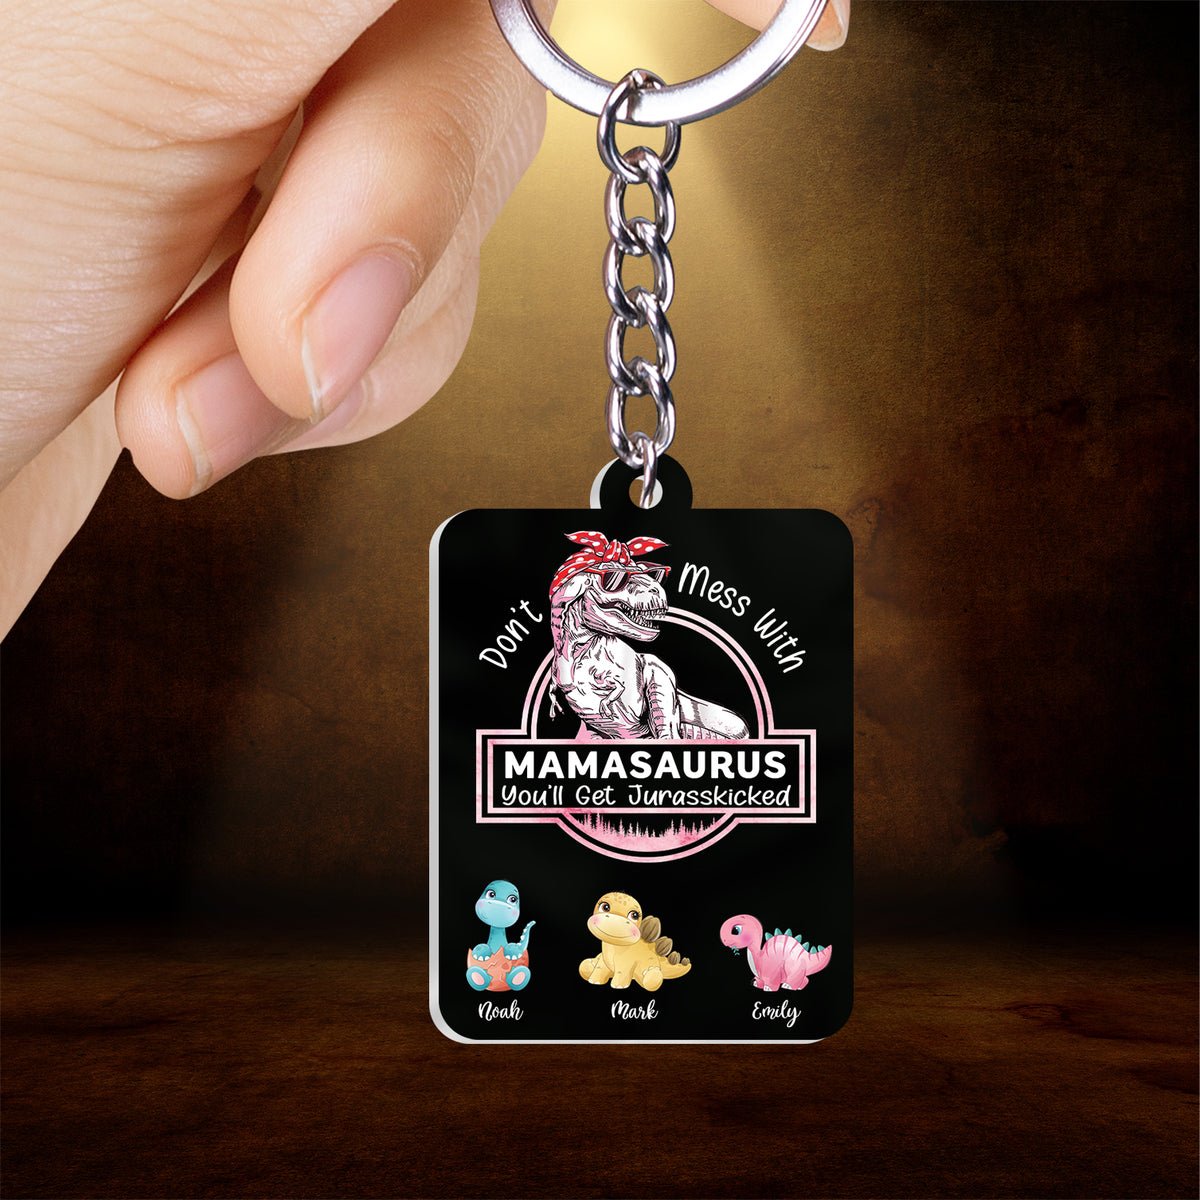 Don't Mess With Mamasaurus, You'll Get Jurasskicked (Ver 2) - Personalized Acrylic Keychain - Best Gift For Mother, Grandma